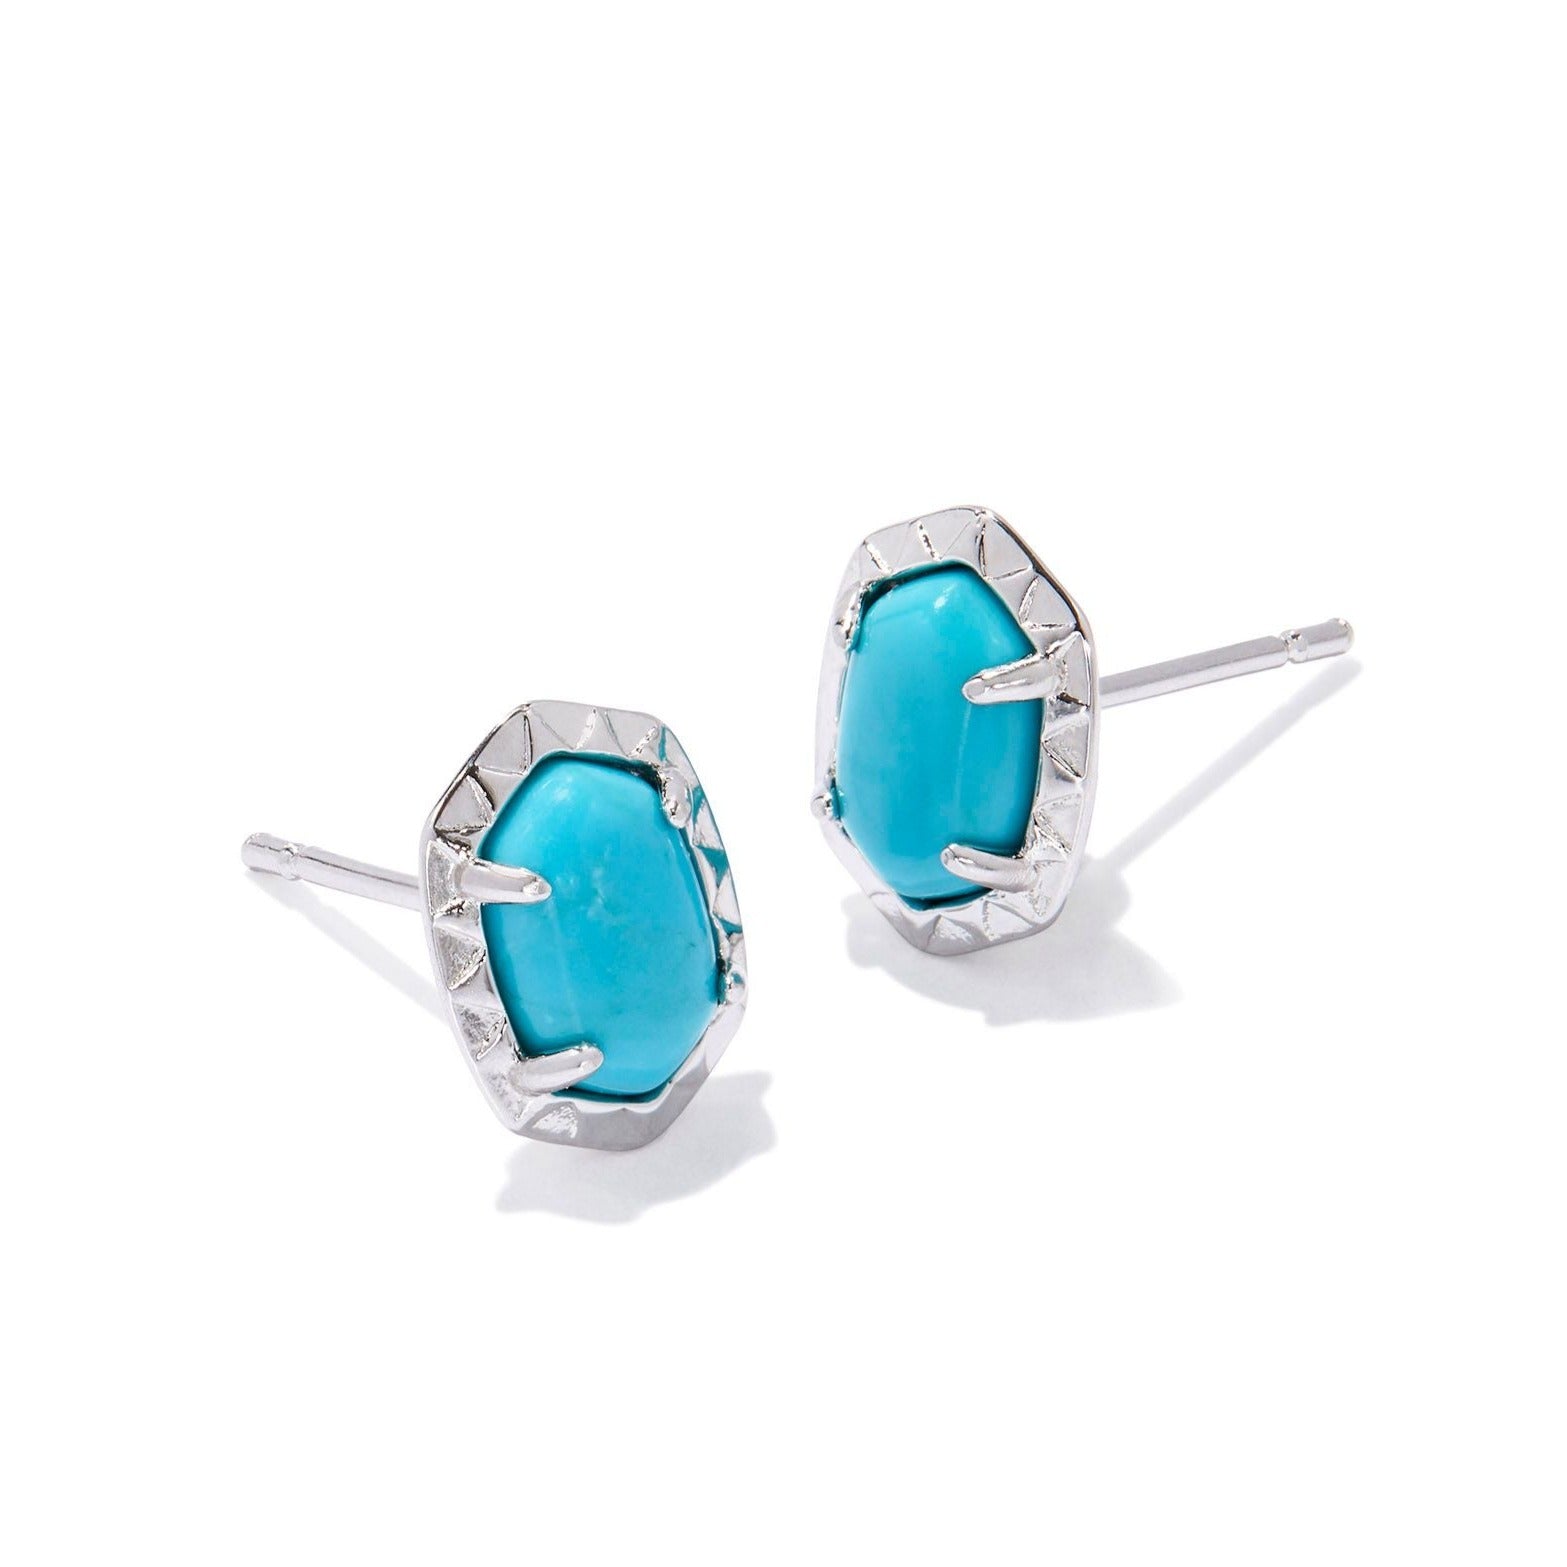 Kendra Scott | Daphne Silver Stud Earrings in Variegated Turquoise Magnesite - Giddy Up Glamour Boutique